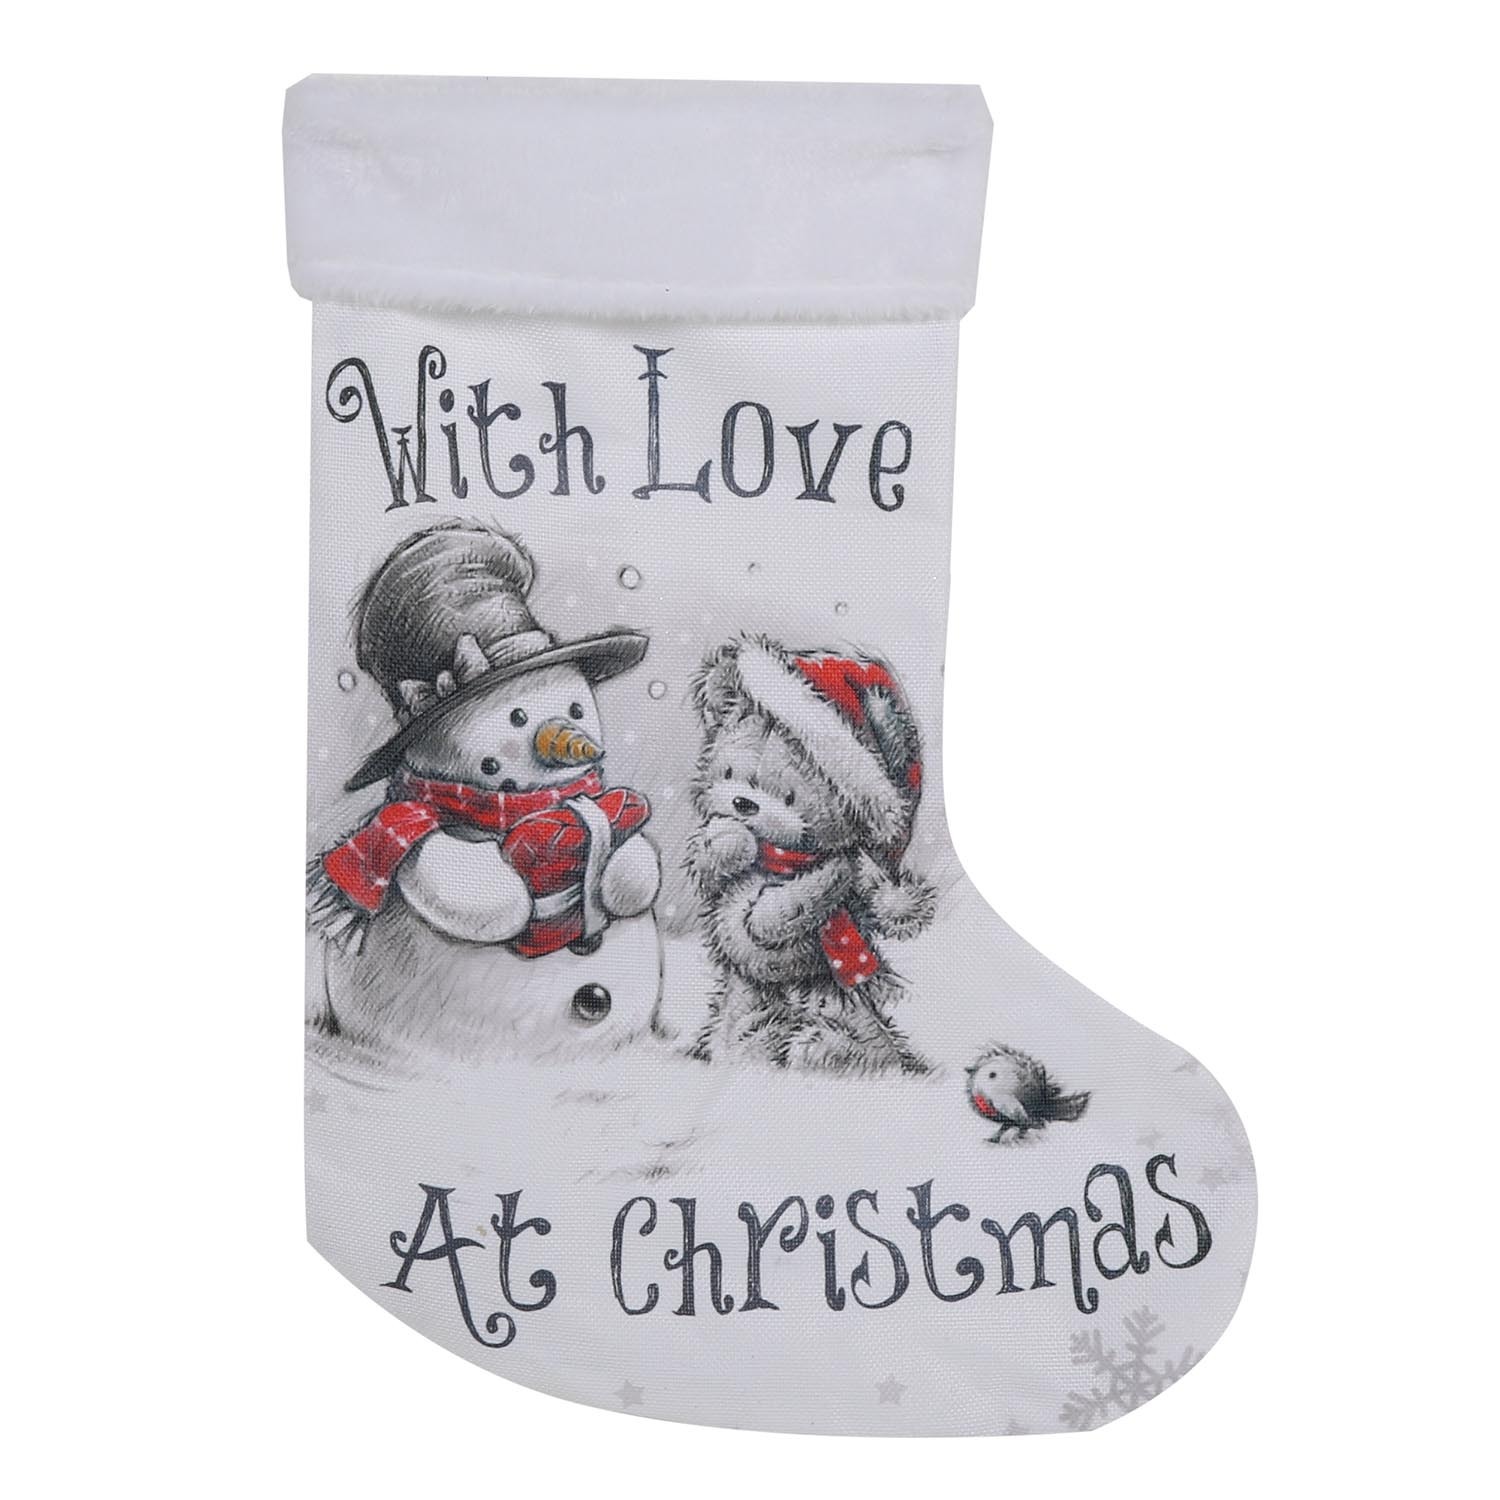 With Love at Christmas Stocking - White Image